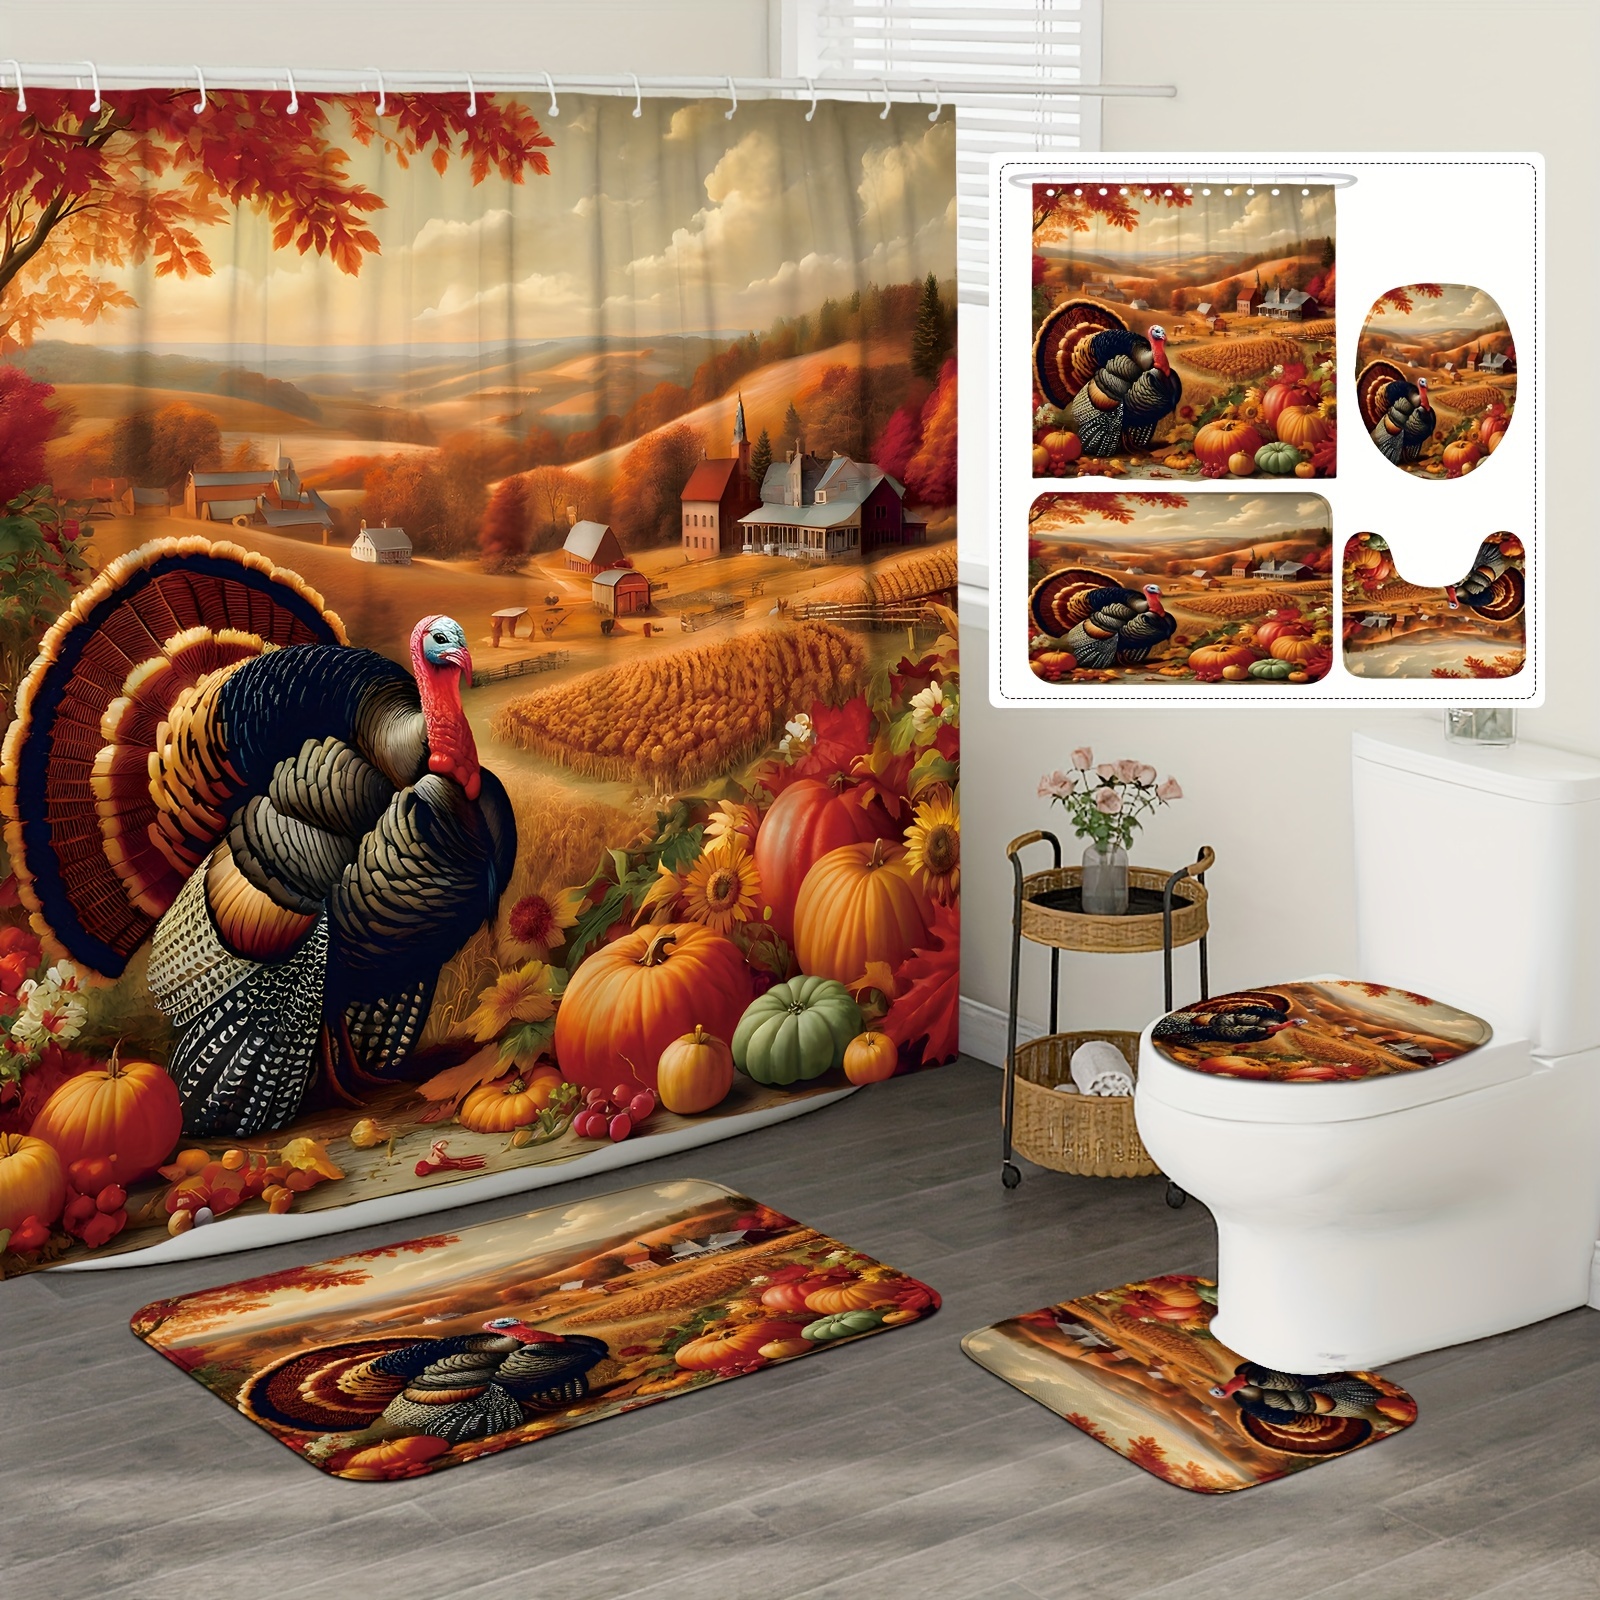 

Autumn Harvest Shower Curtain Set - 1/4 Pcs Waterproof Polyester With Turkey & Pumpkin Design, Includes Non-slip Bath Mat, U-shaped Toilet Lid Cover, And 12 Hooks - Perfect For Fall Bathroom Decor